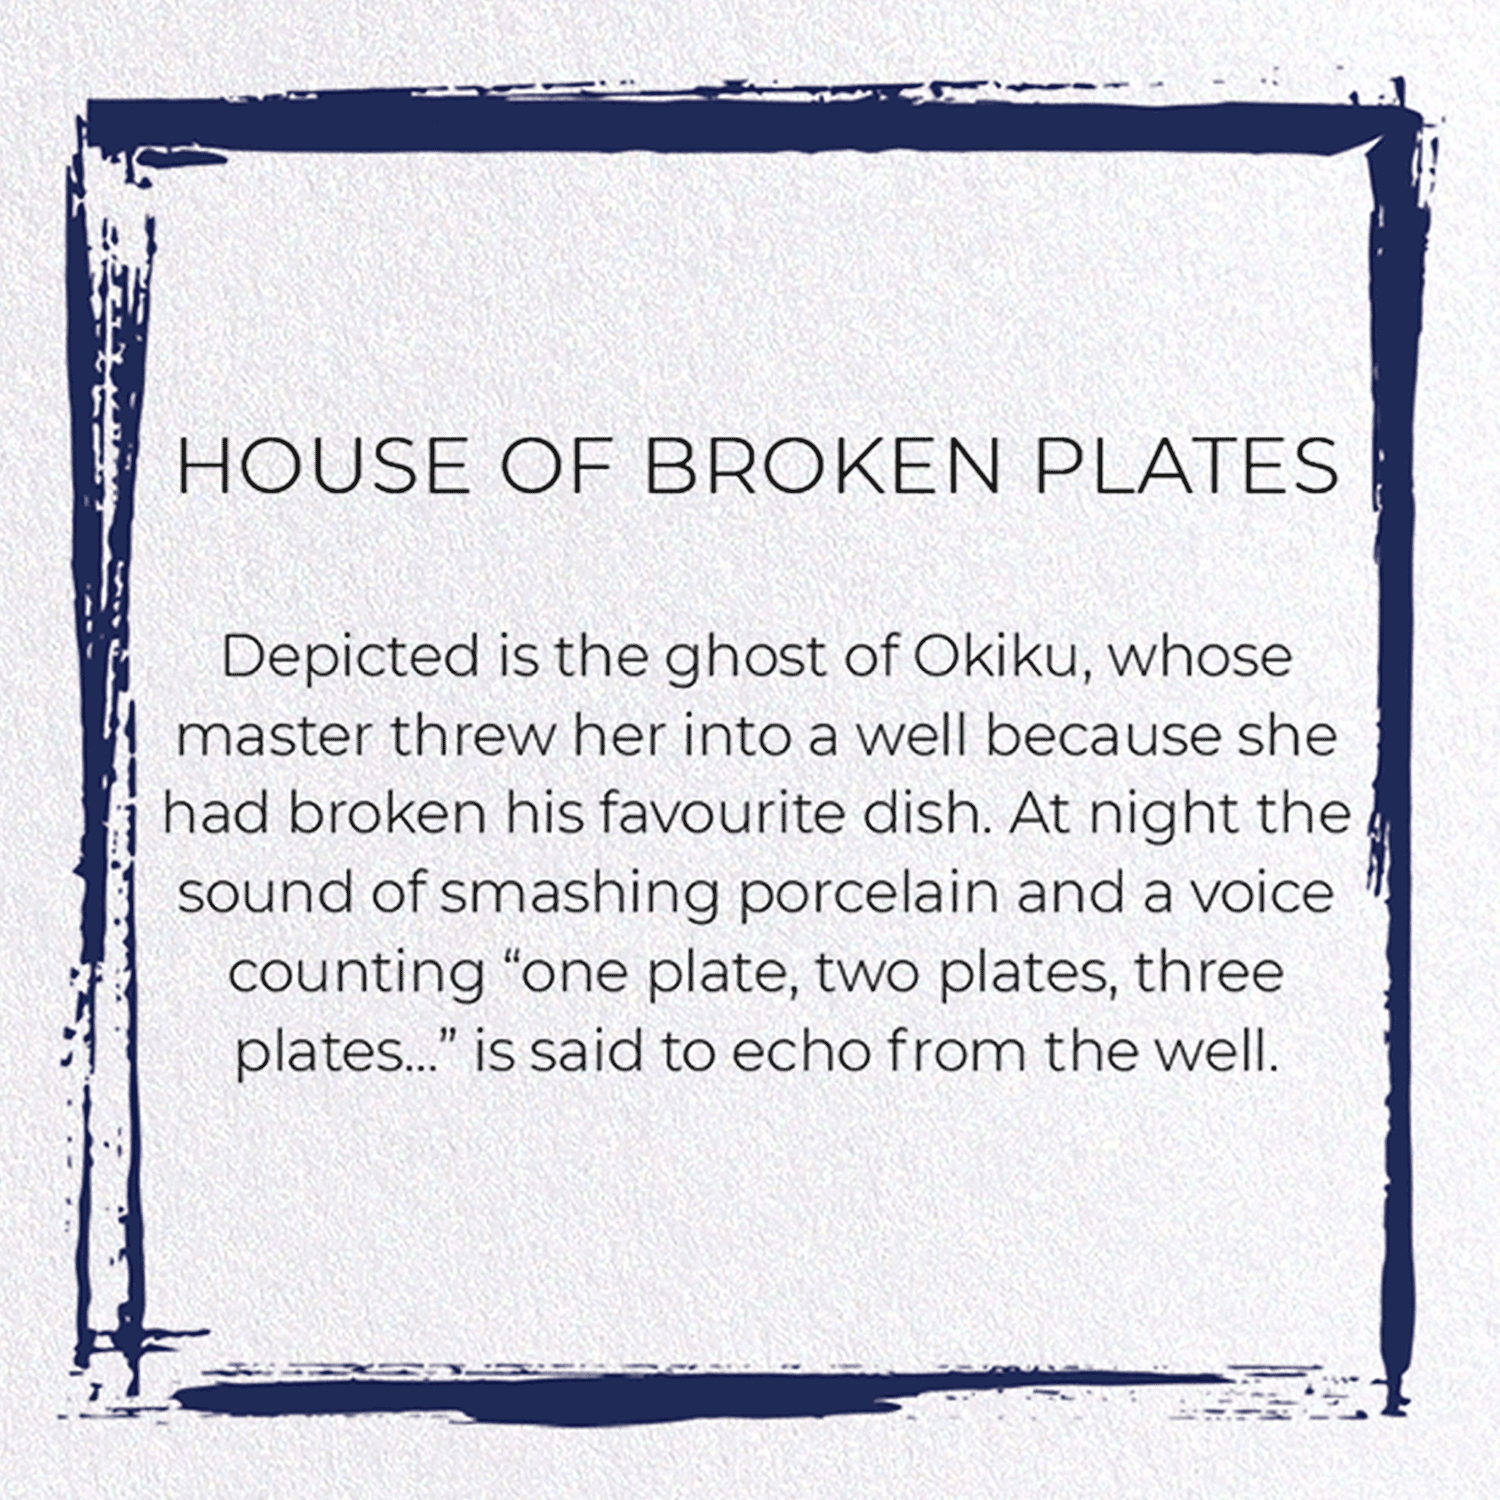 HOUSE OF BROKEN PLATES: Japanese Greeting Card